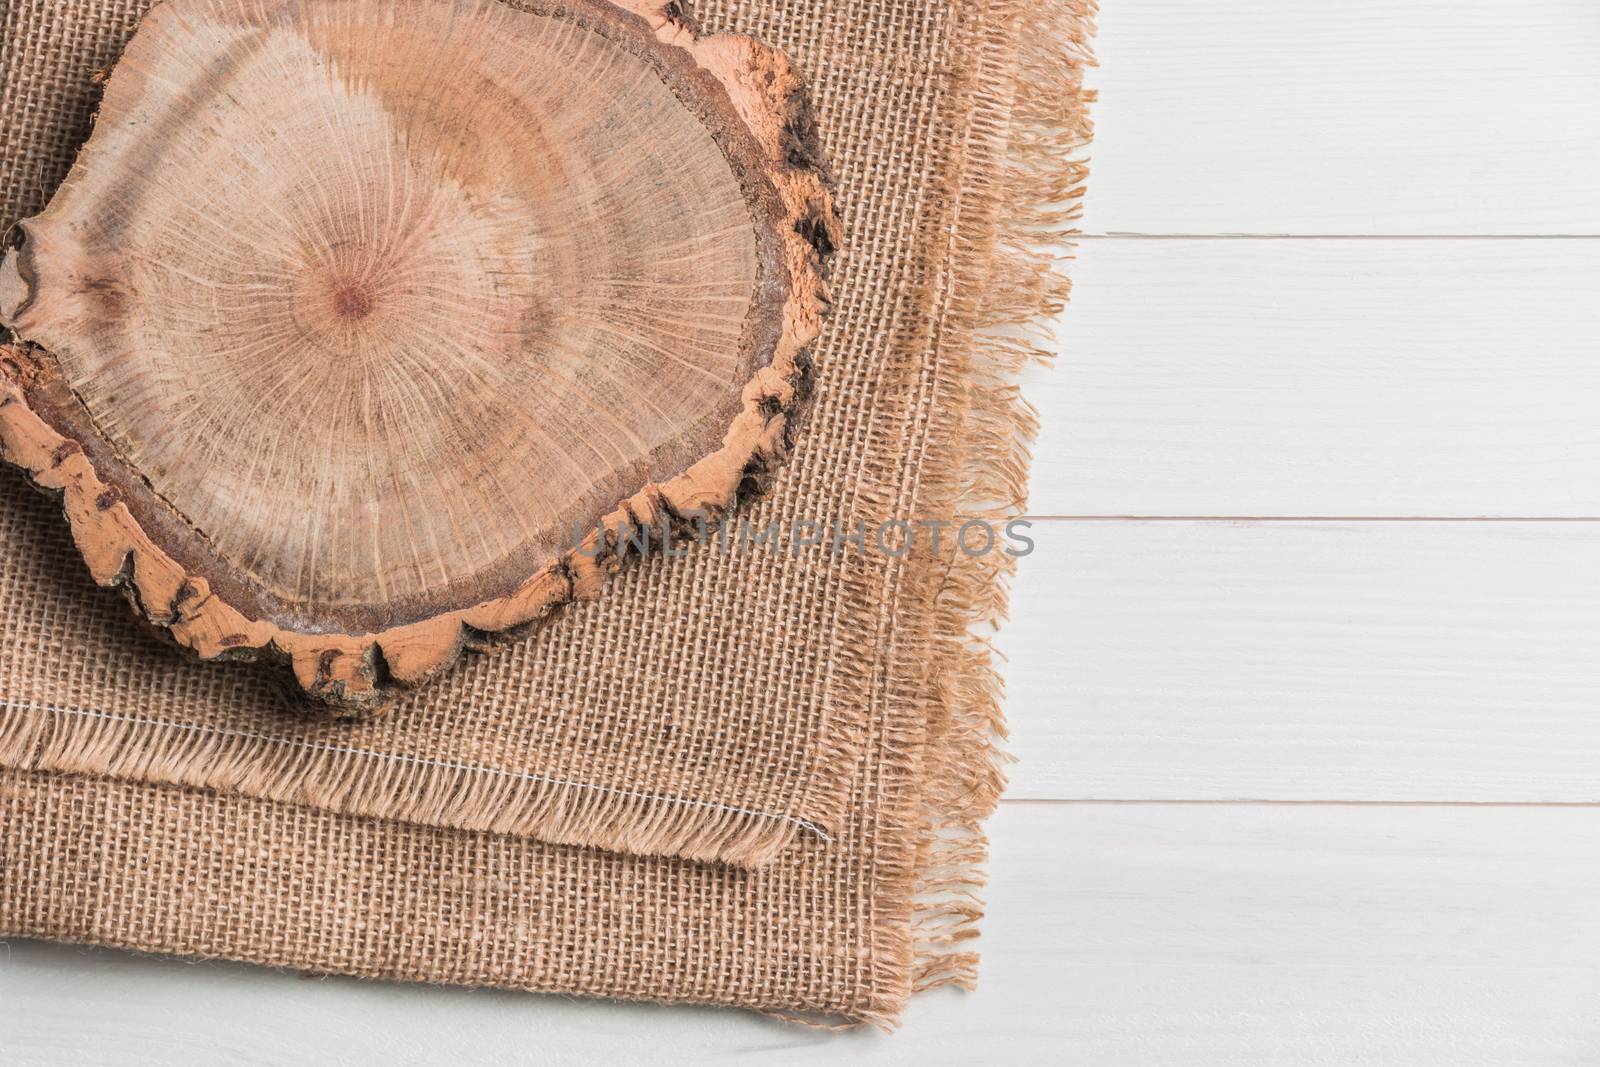 Wood plank board above burlap on wooden table, useful as a background. Top view with copy space.